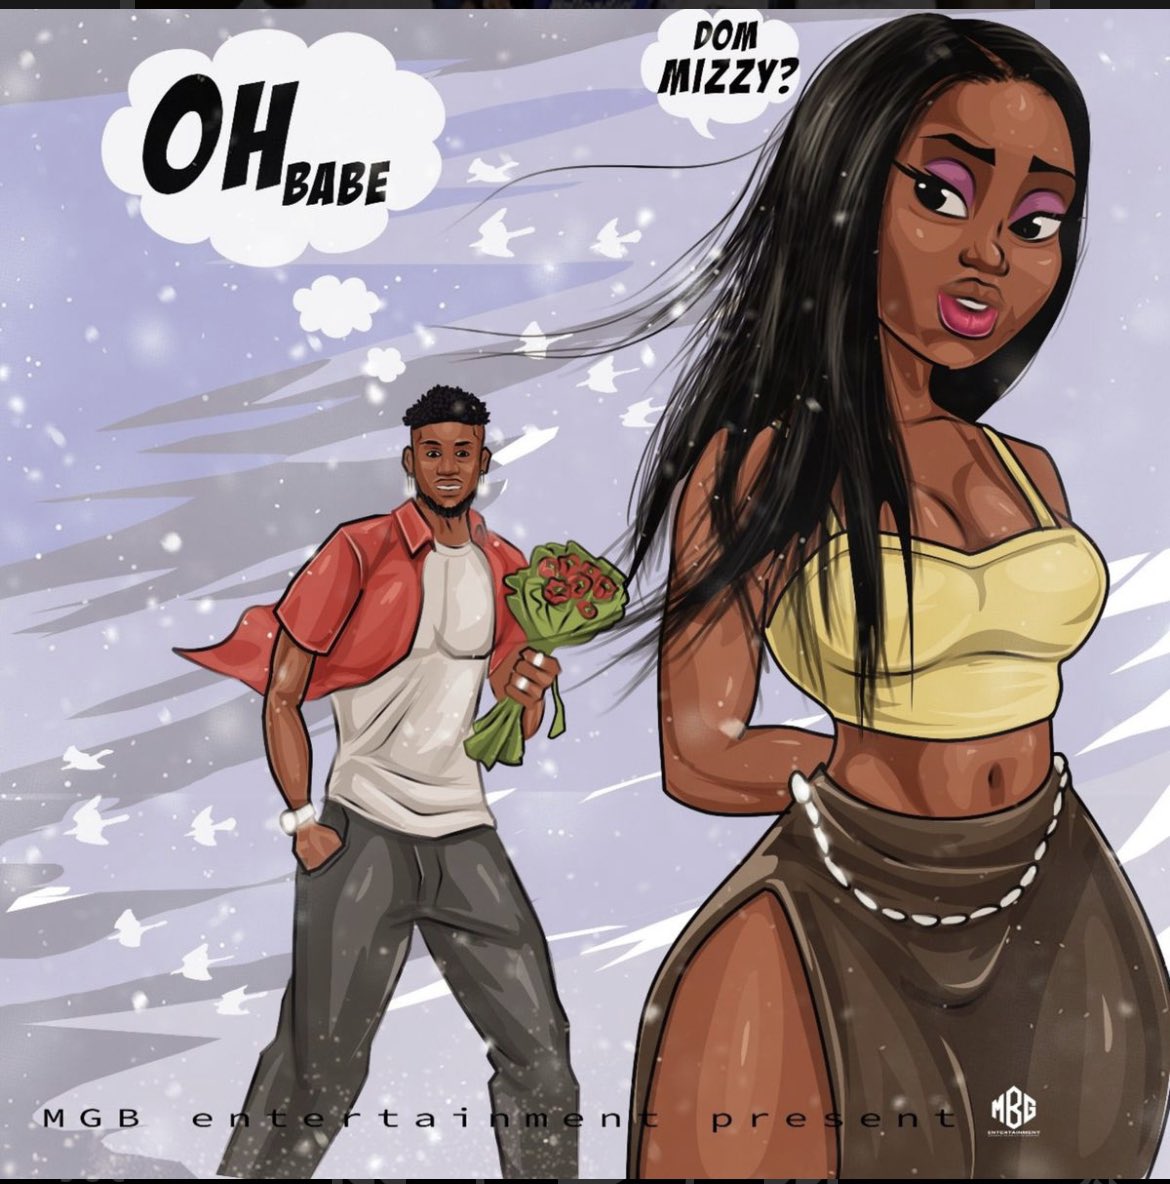 #NowPlaying [OH BABE]🎙️🎙️🎶🎧 BY  
@Dommizzyvibez 
#NowOnAir🎼🎵🔊🎶⏮️🔂🔀
#TrendingNow
Cc:@CITYFM10517
#eveningVibes MOTIVATION
#NonStopping 
#Musicstillmatters
#StaysafeNigeria #TuneInNow